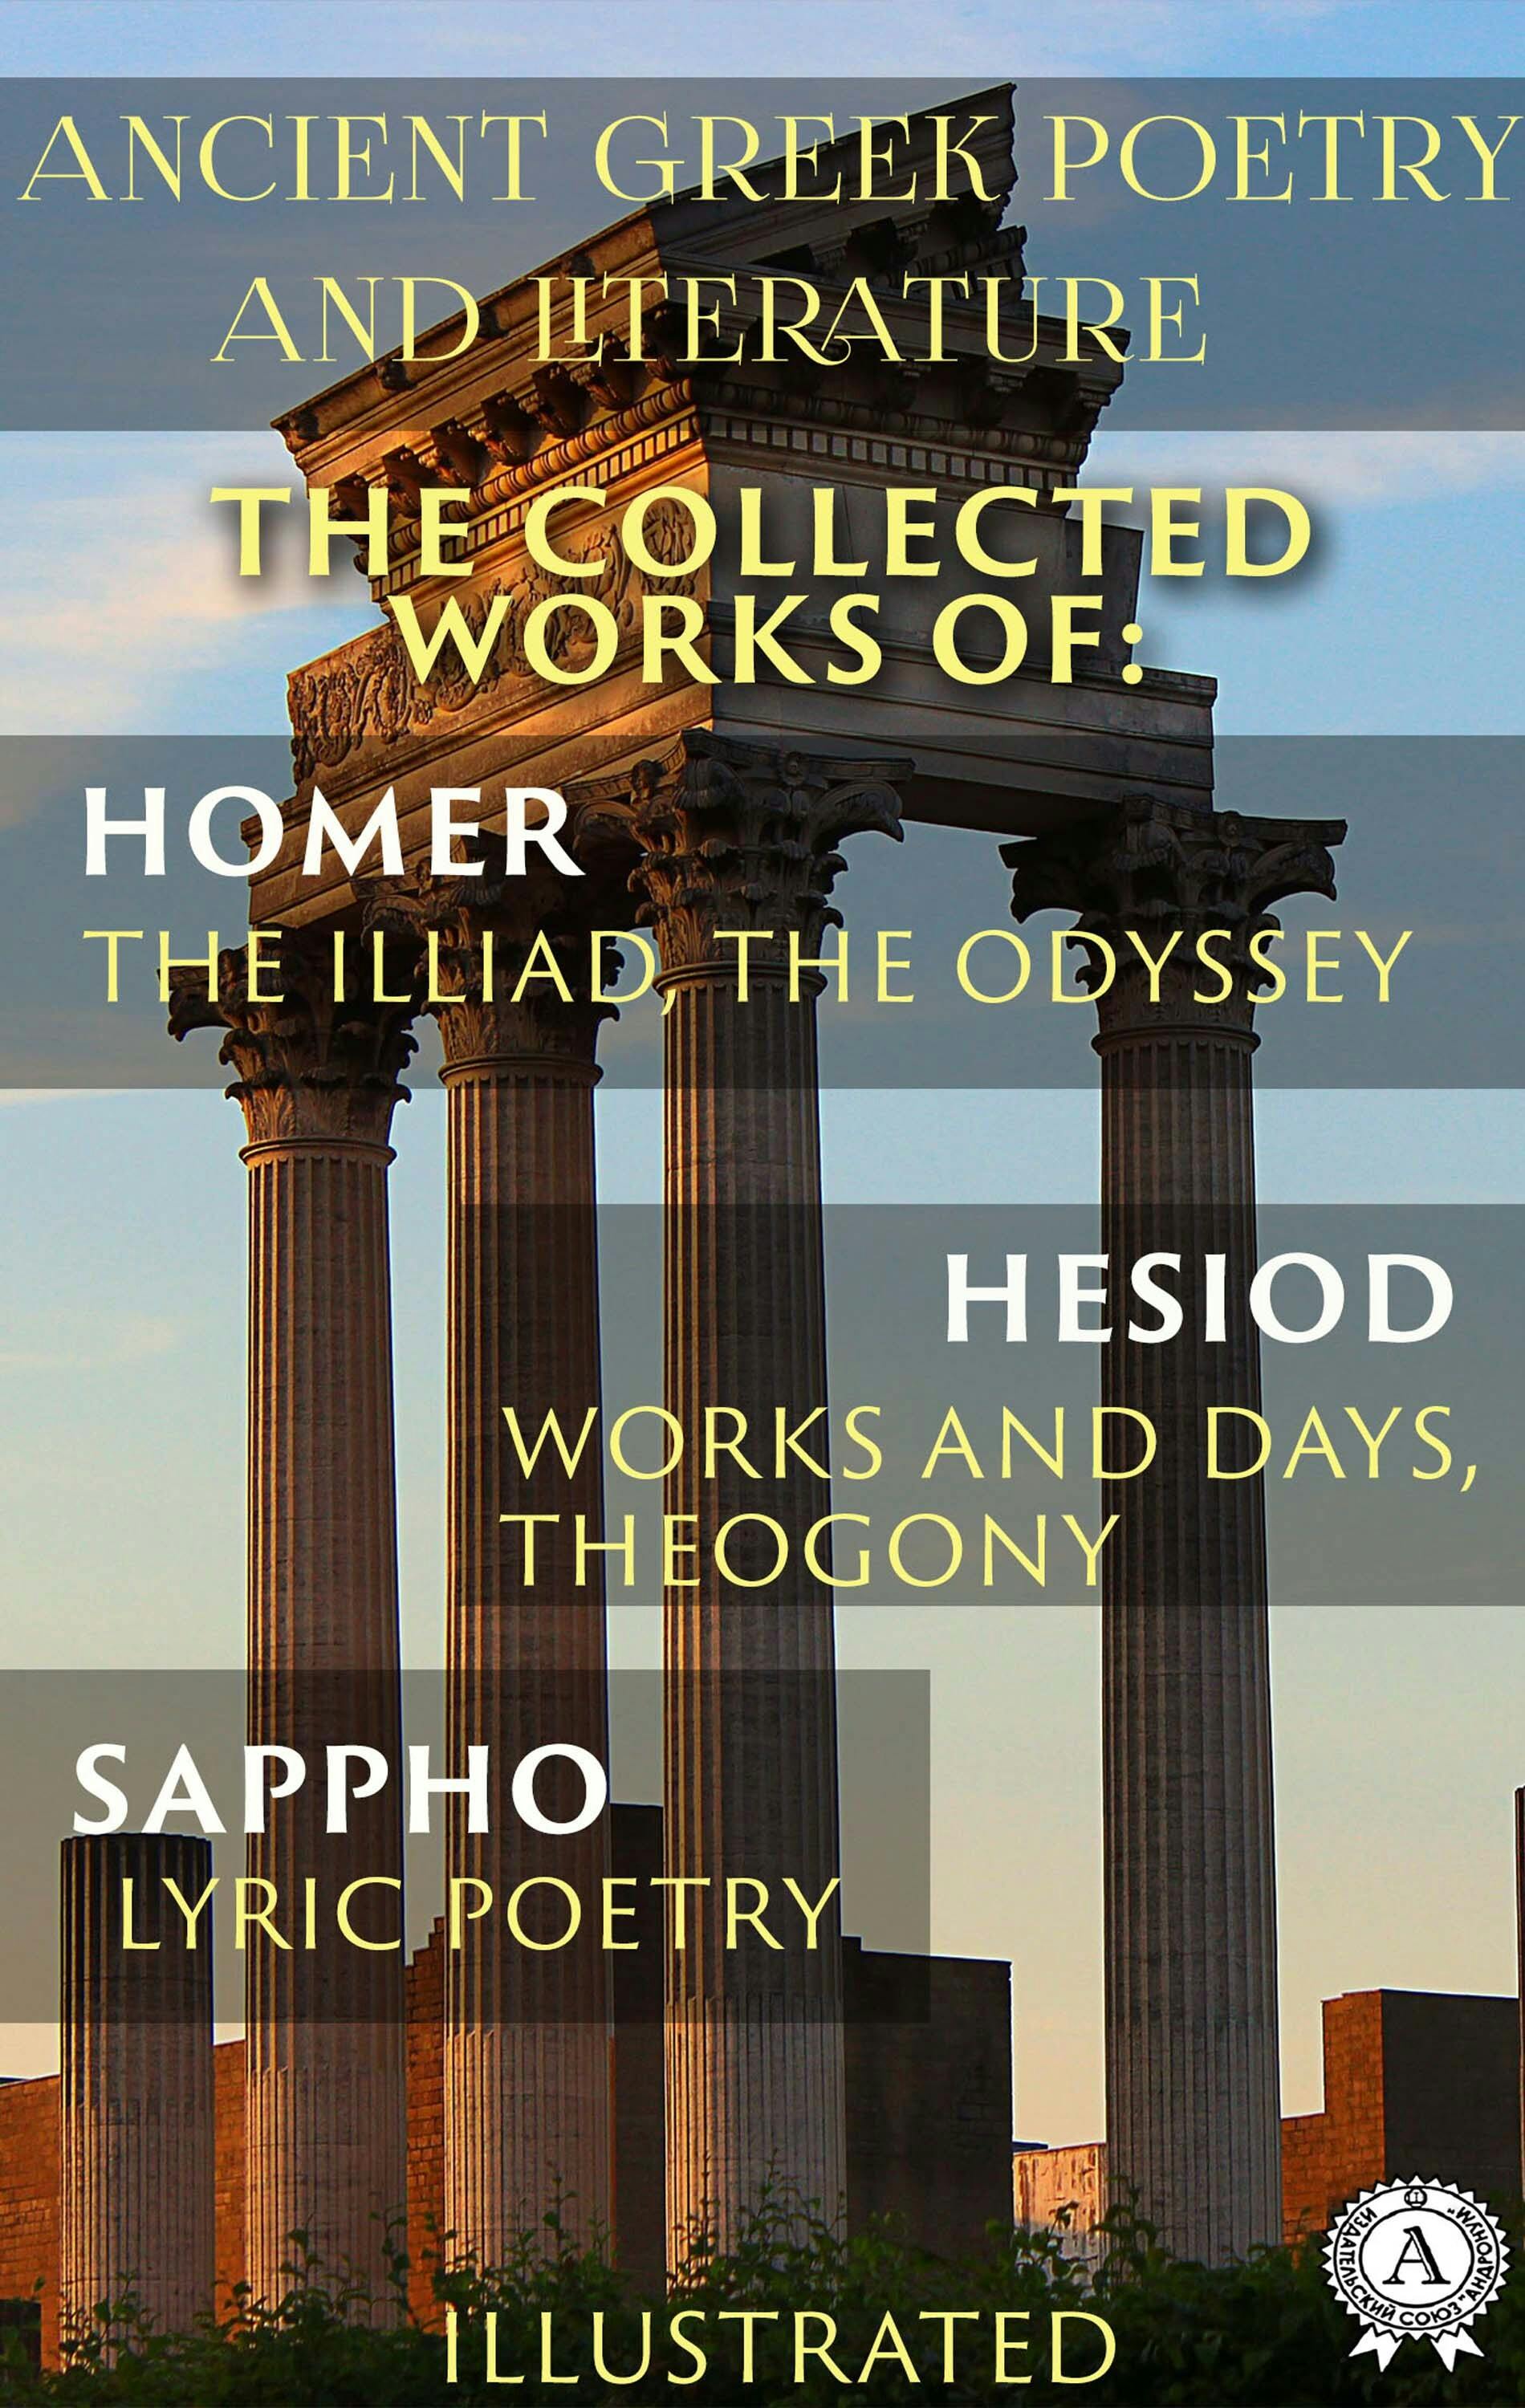 Ancient Greek poetry and Literature. The Collected Works of Homer, Hesiod, and Sappho (Illustrated): The Illiad, The Odyssey, Works and Days, Theogony, Lyric Poetry - undefined